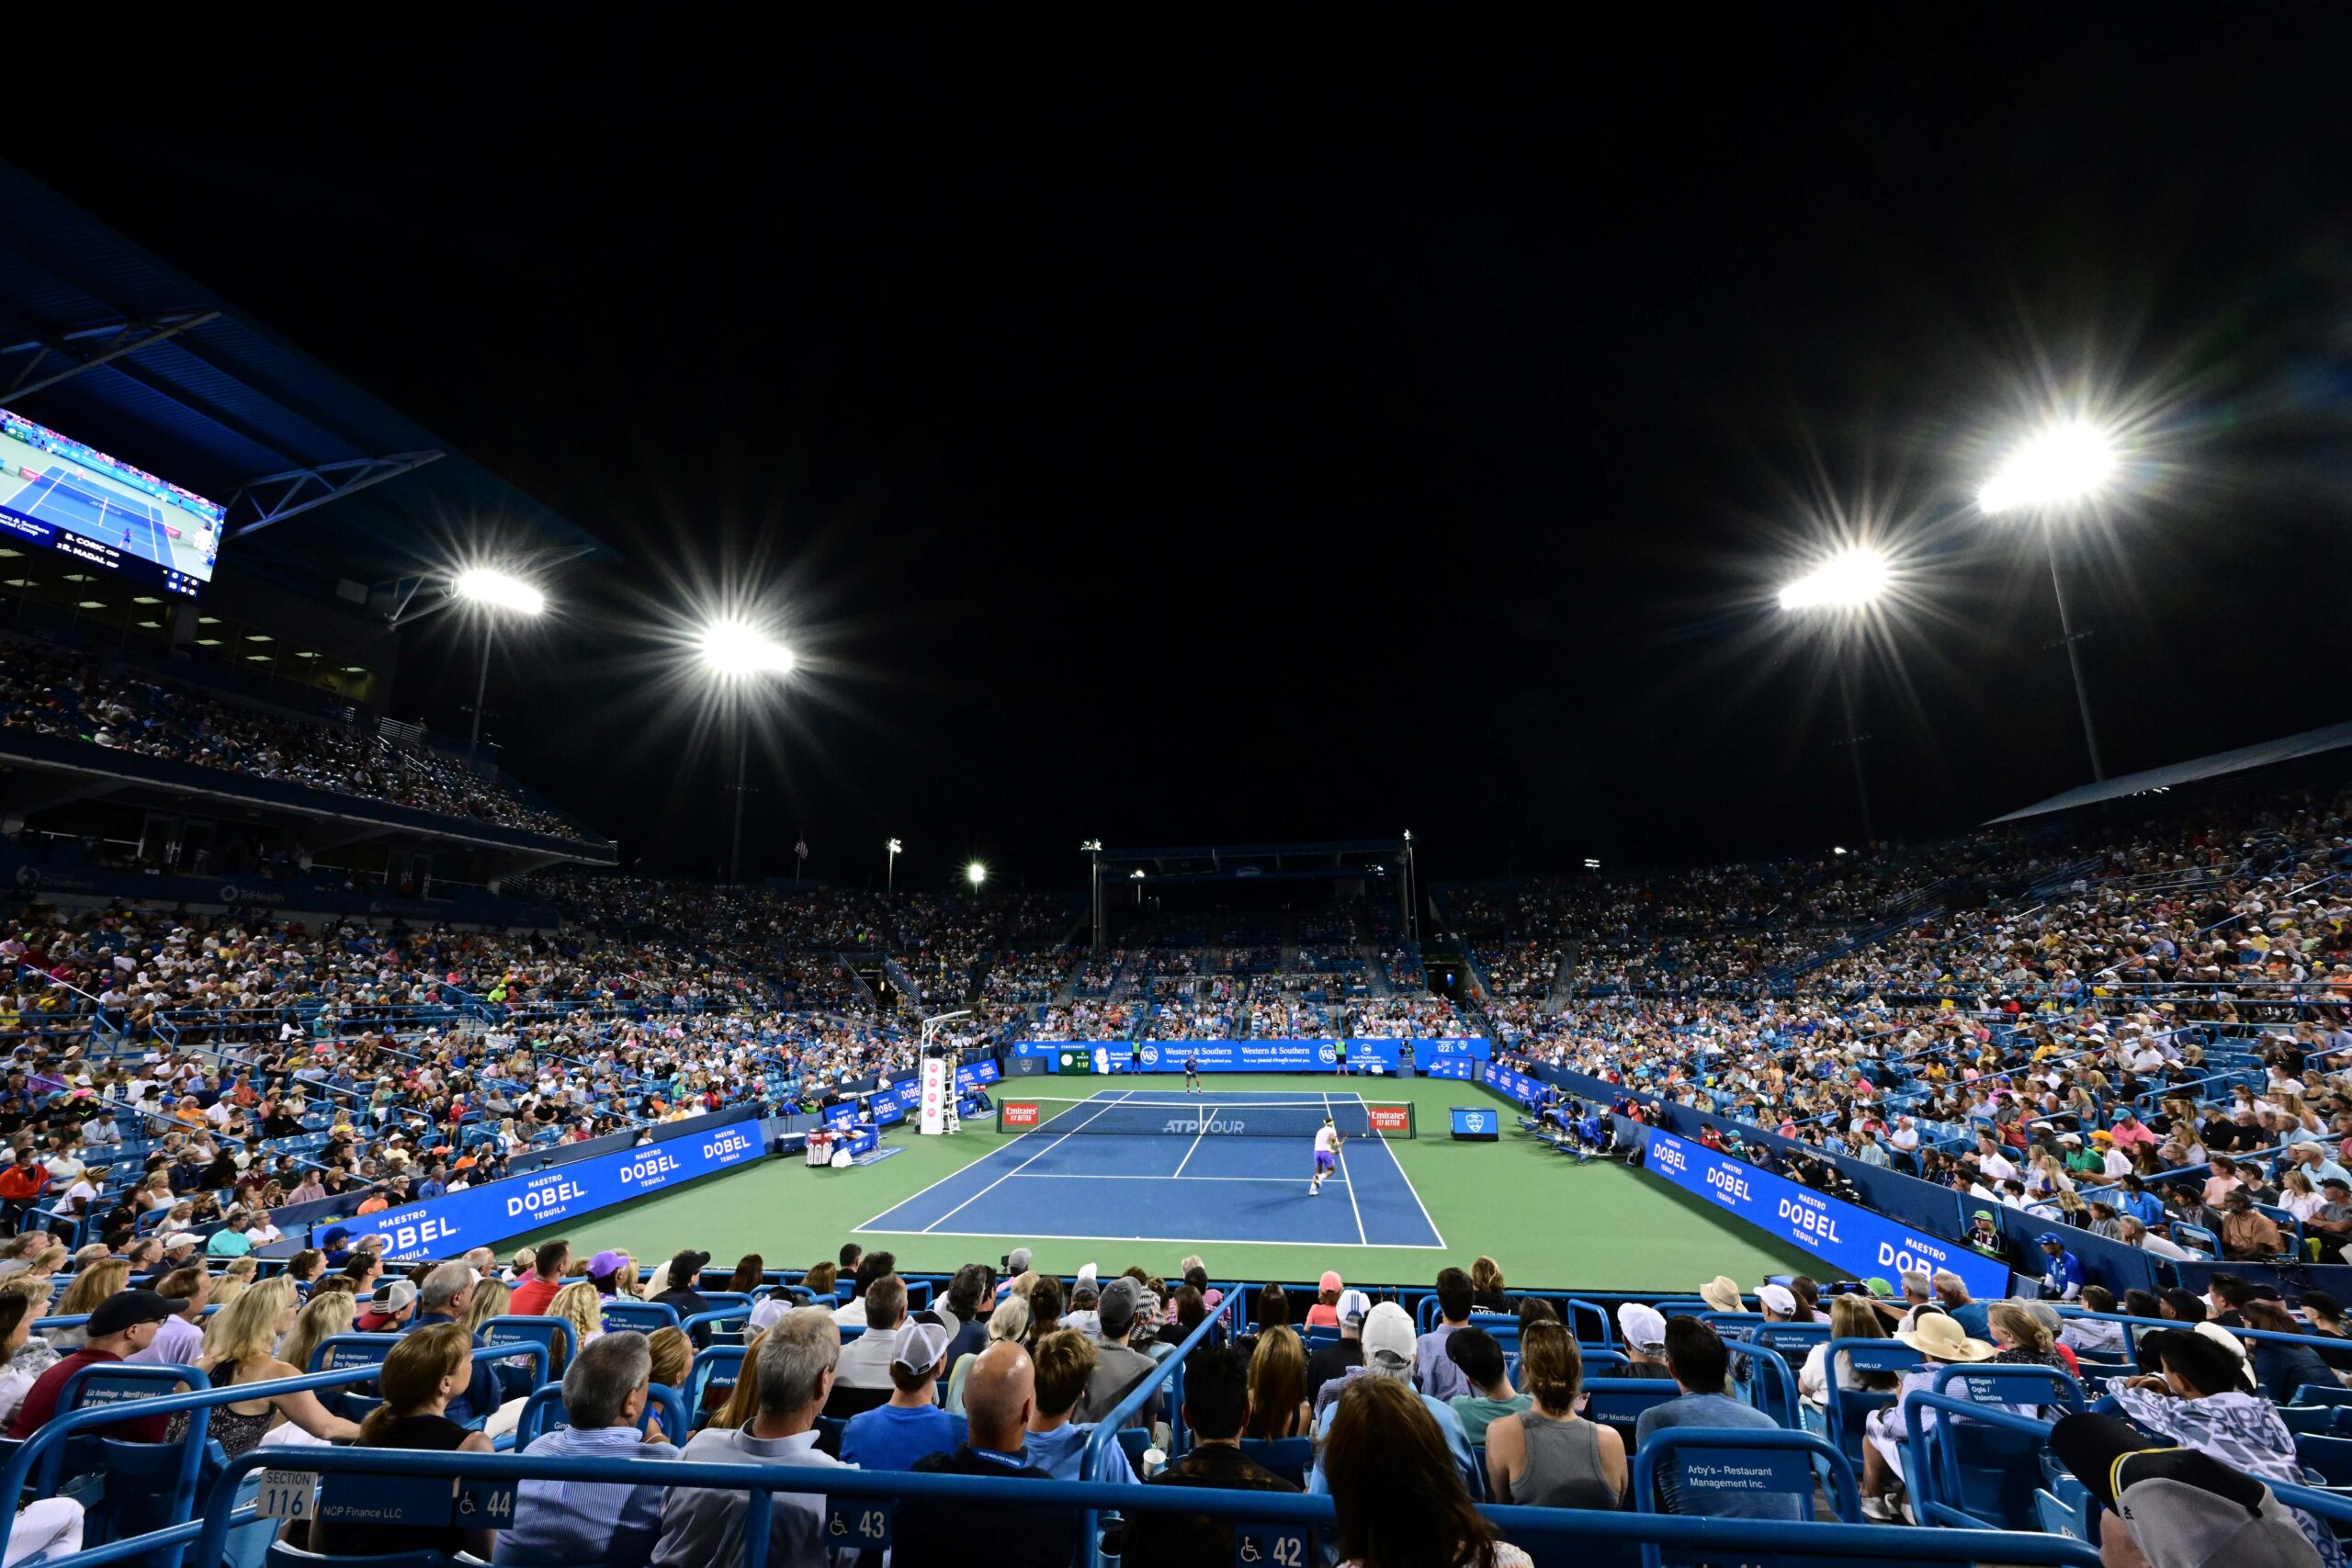 View of night match on center court